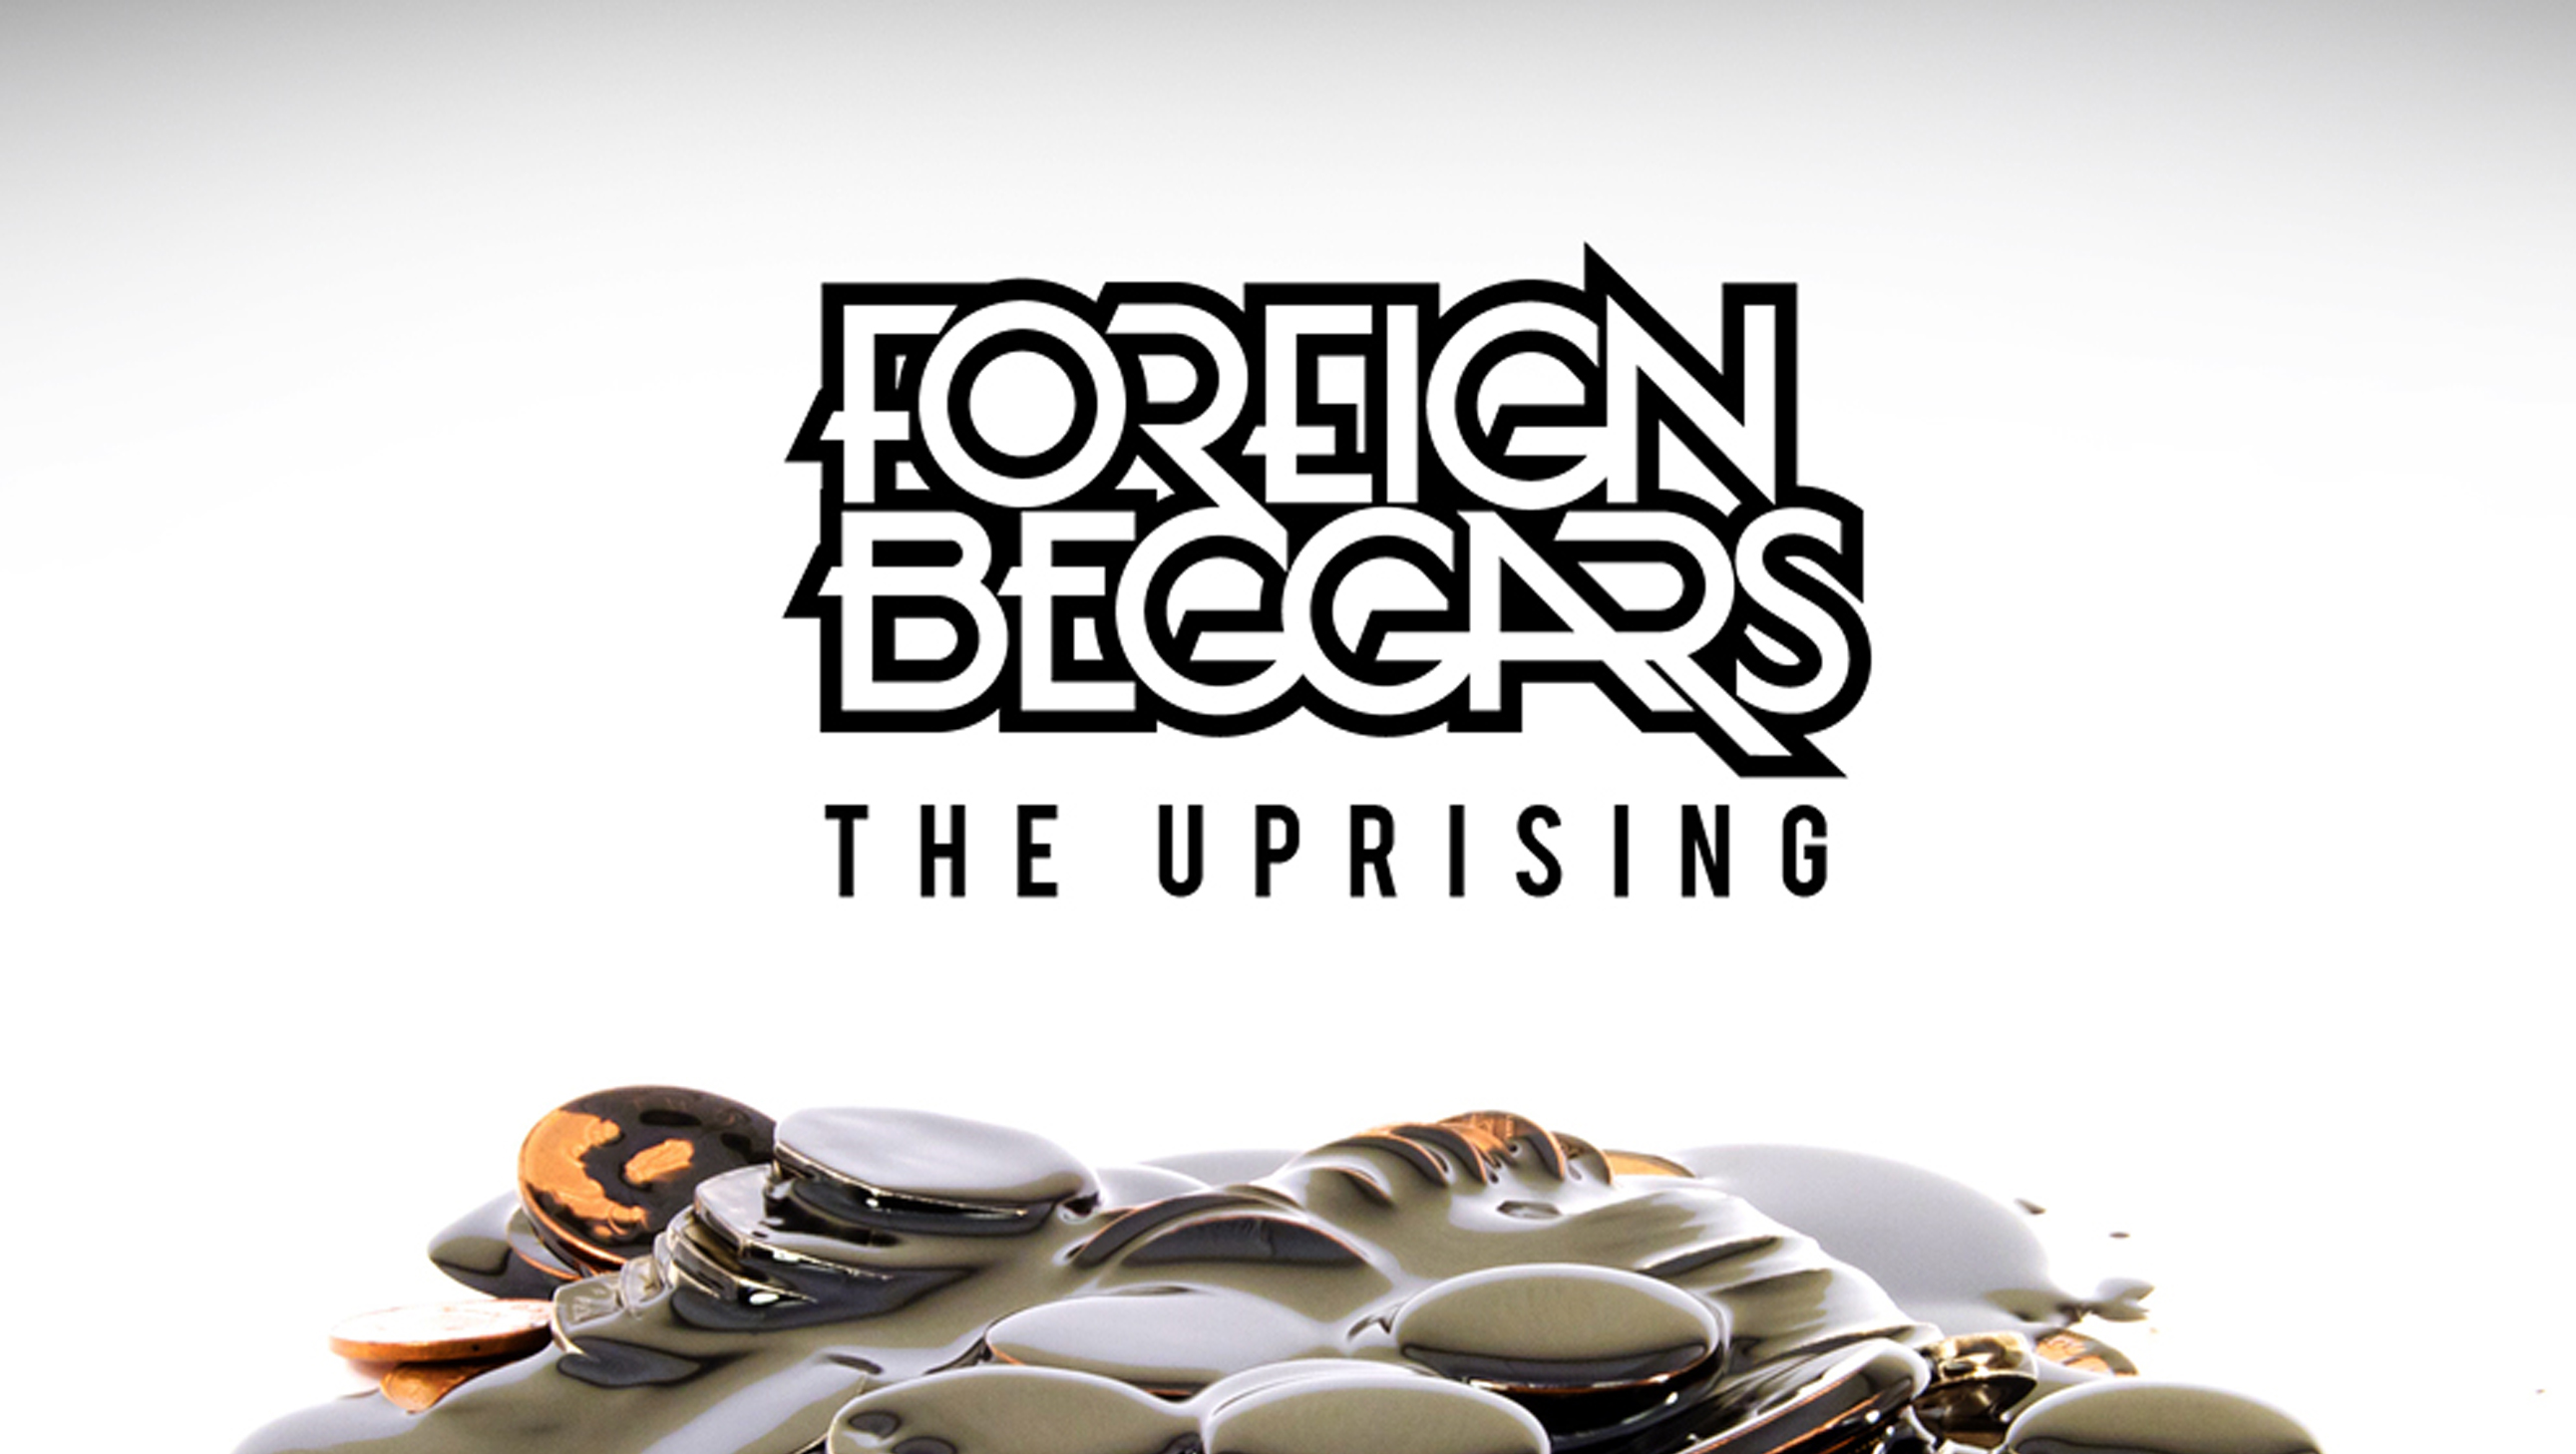 The Uprising Foreign Beggars Lastfm